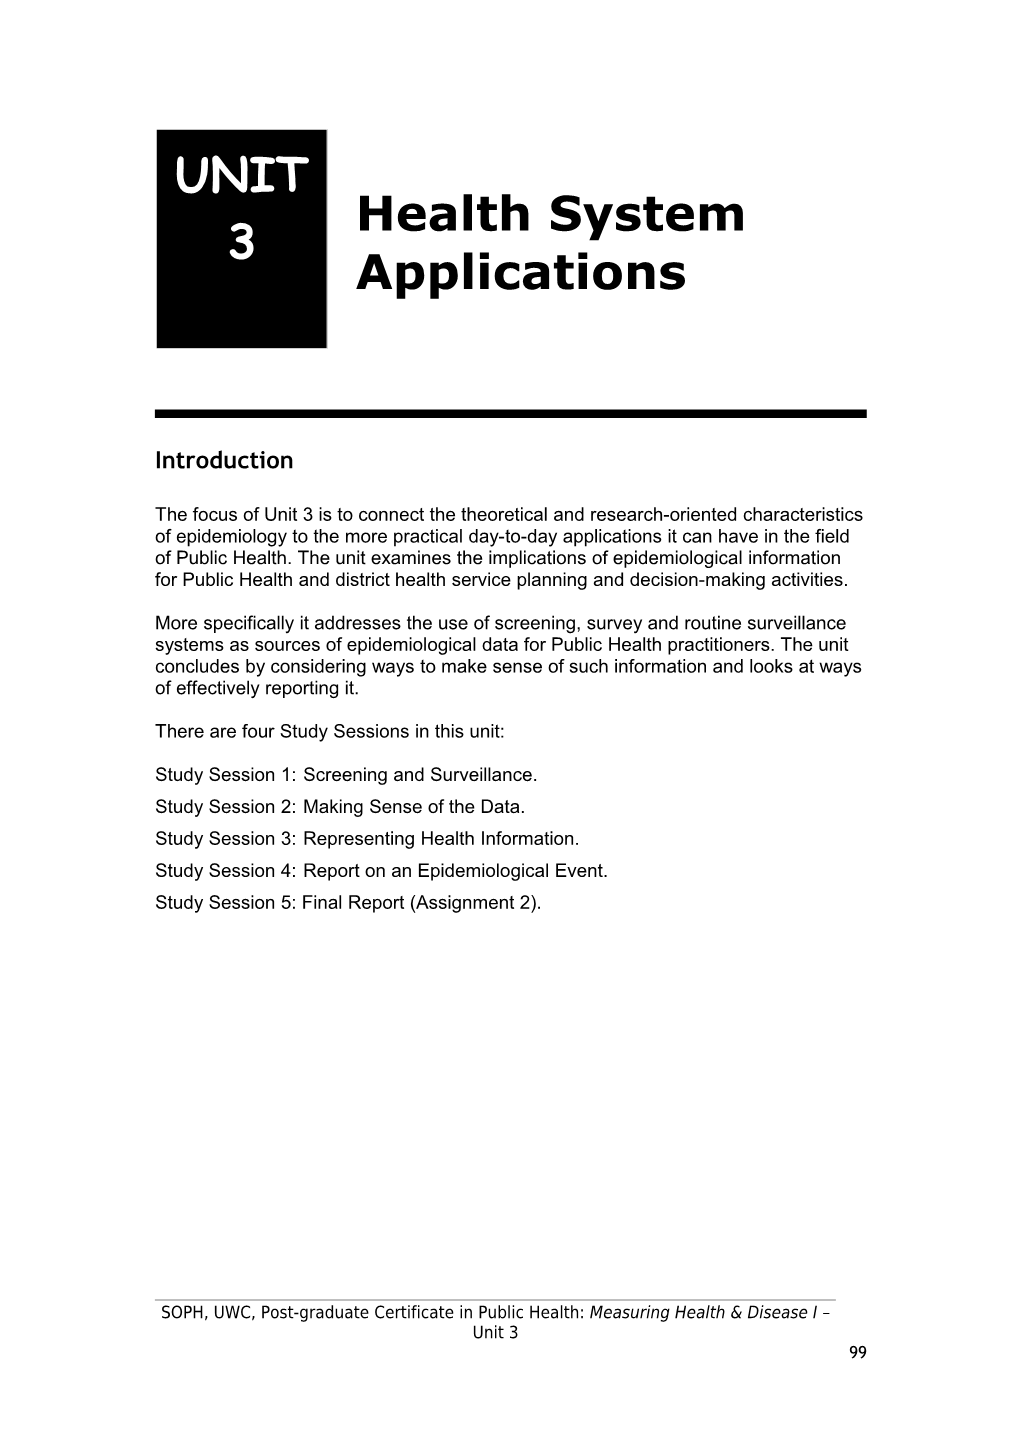 Health System Applications